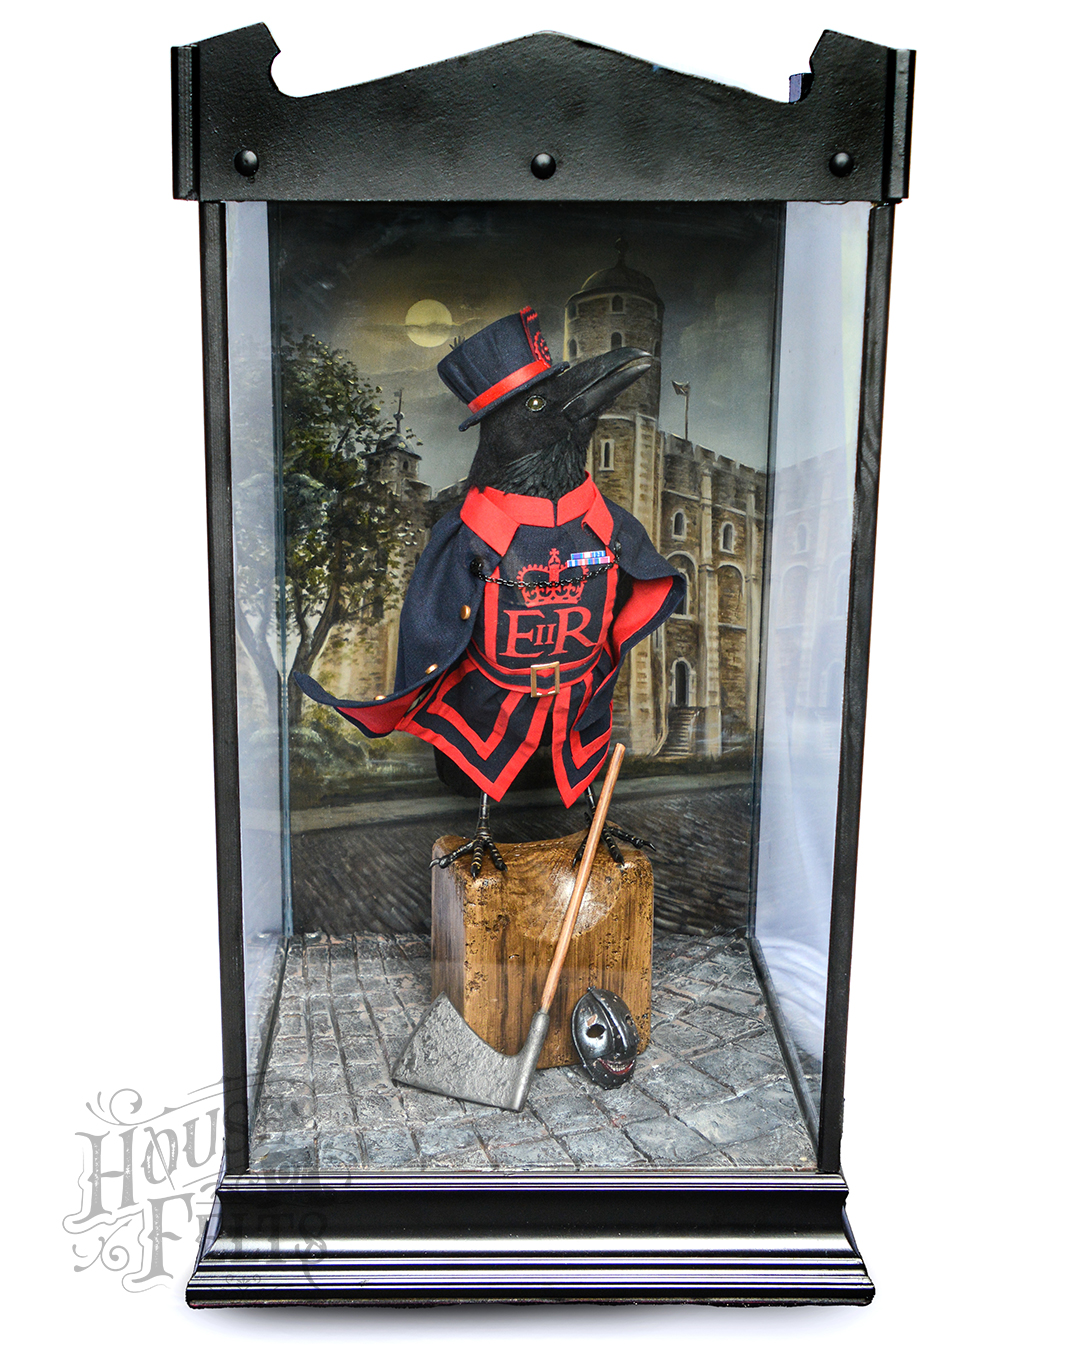 Needle Felted Beefeater Raven in Glass Case for the Raven Master at the Tower of London